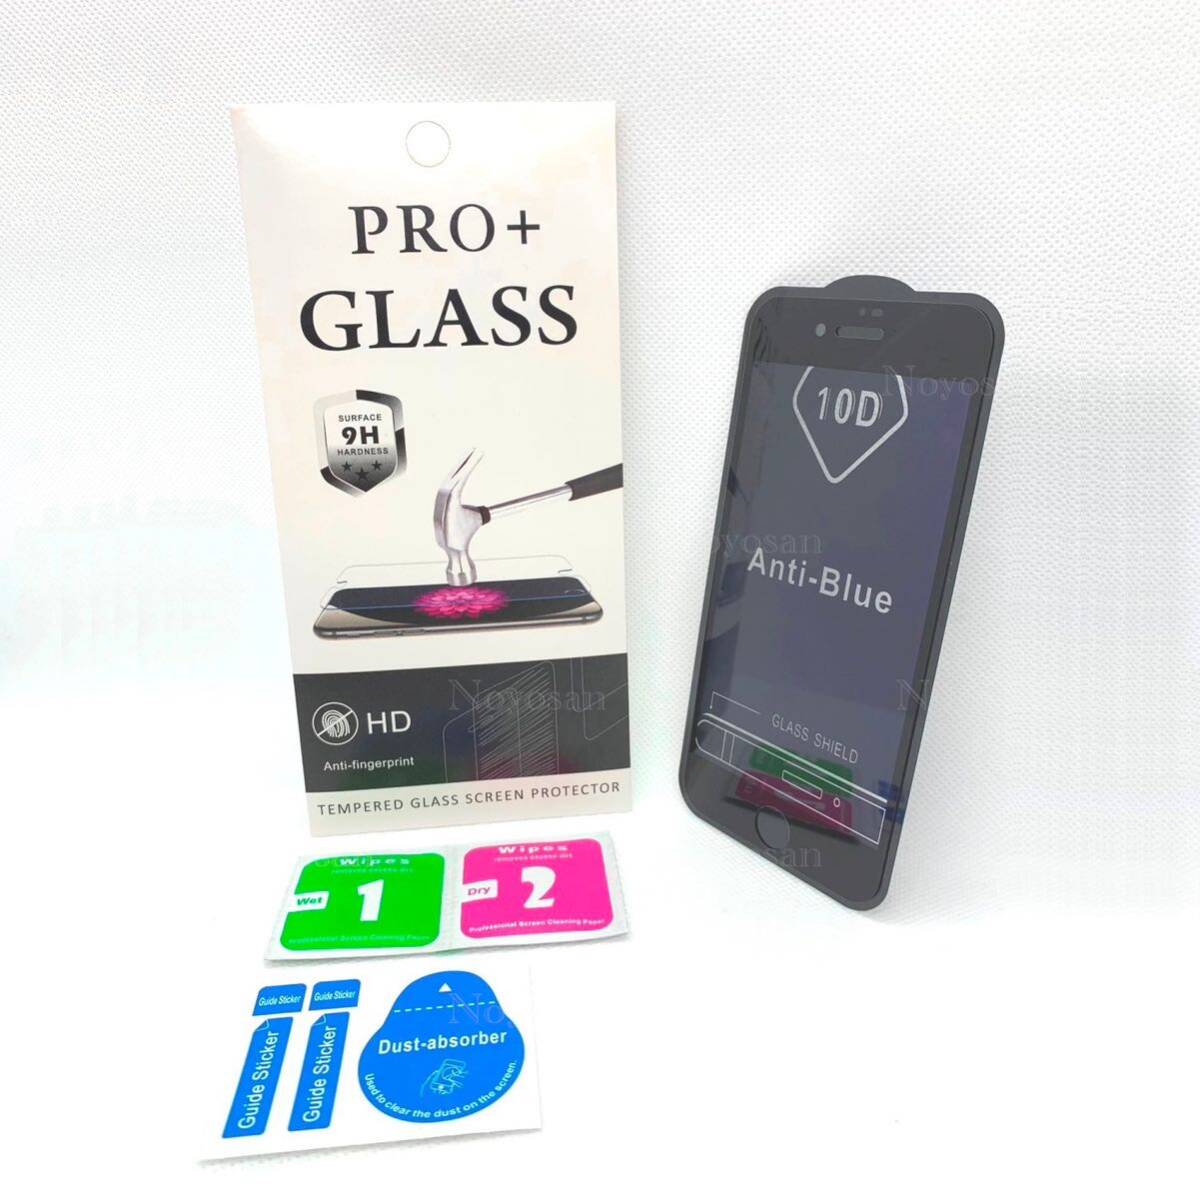 iPhone SE( no. 2 generation ) / iPhoneSE( no. 3 generation ) blue light cut whole surface protection strengthen the glass film 